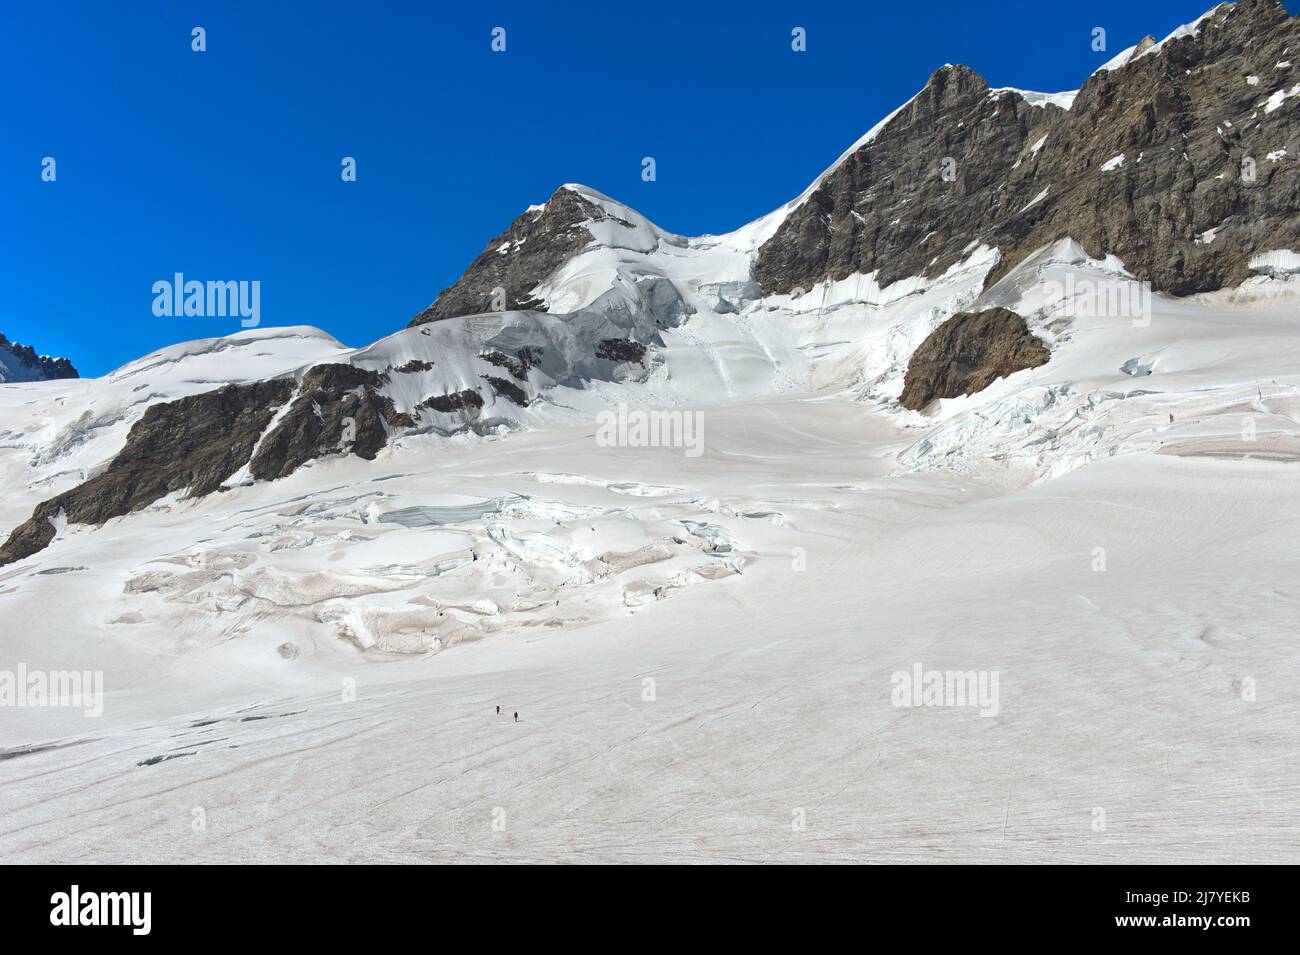 View from the Sphinx tunnel at the Jungfraujoch to the Rottalhorn and Rottalsattel, Jungfrau normal route, Grindelwald, Bernese Oberland, Switzerland Stock Photo